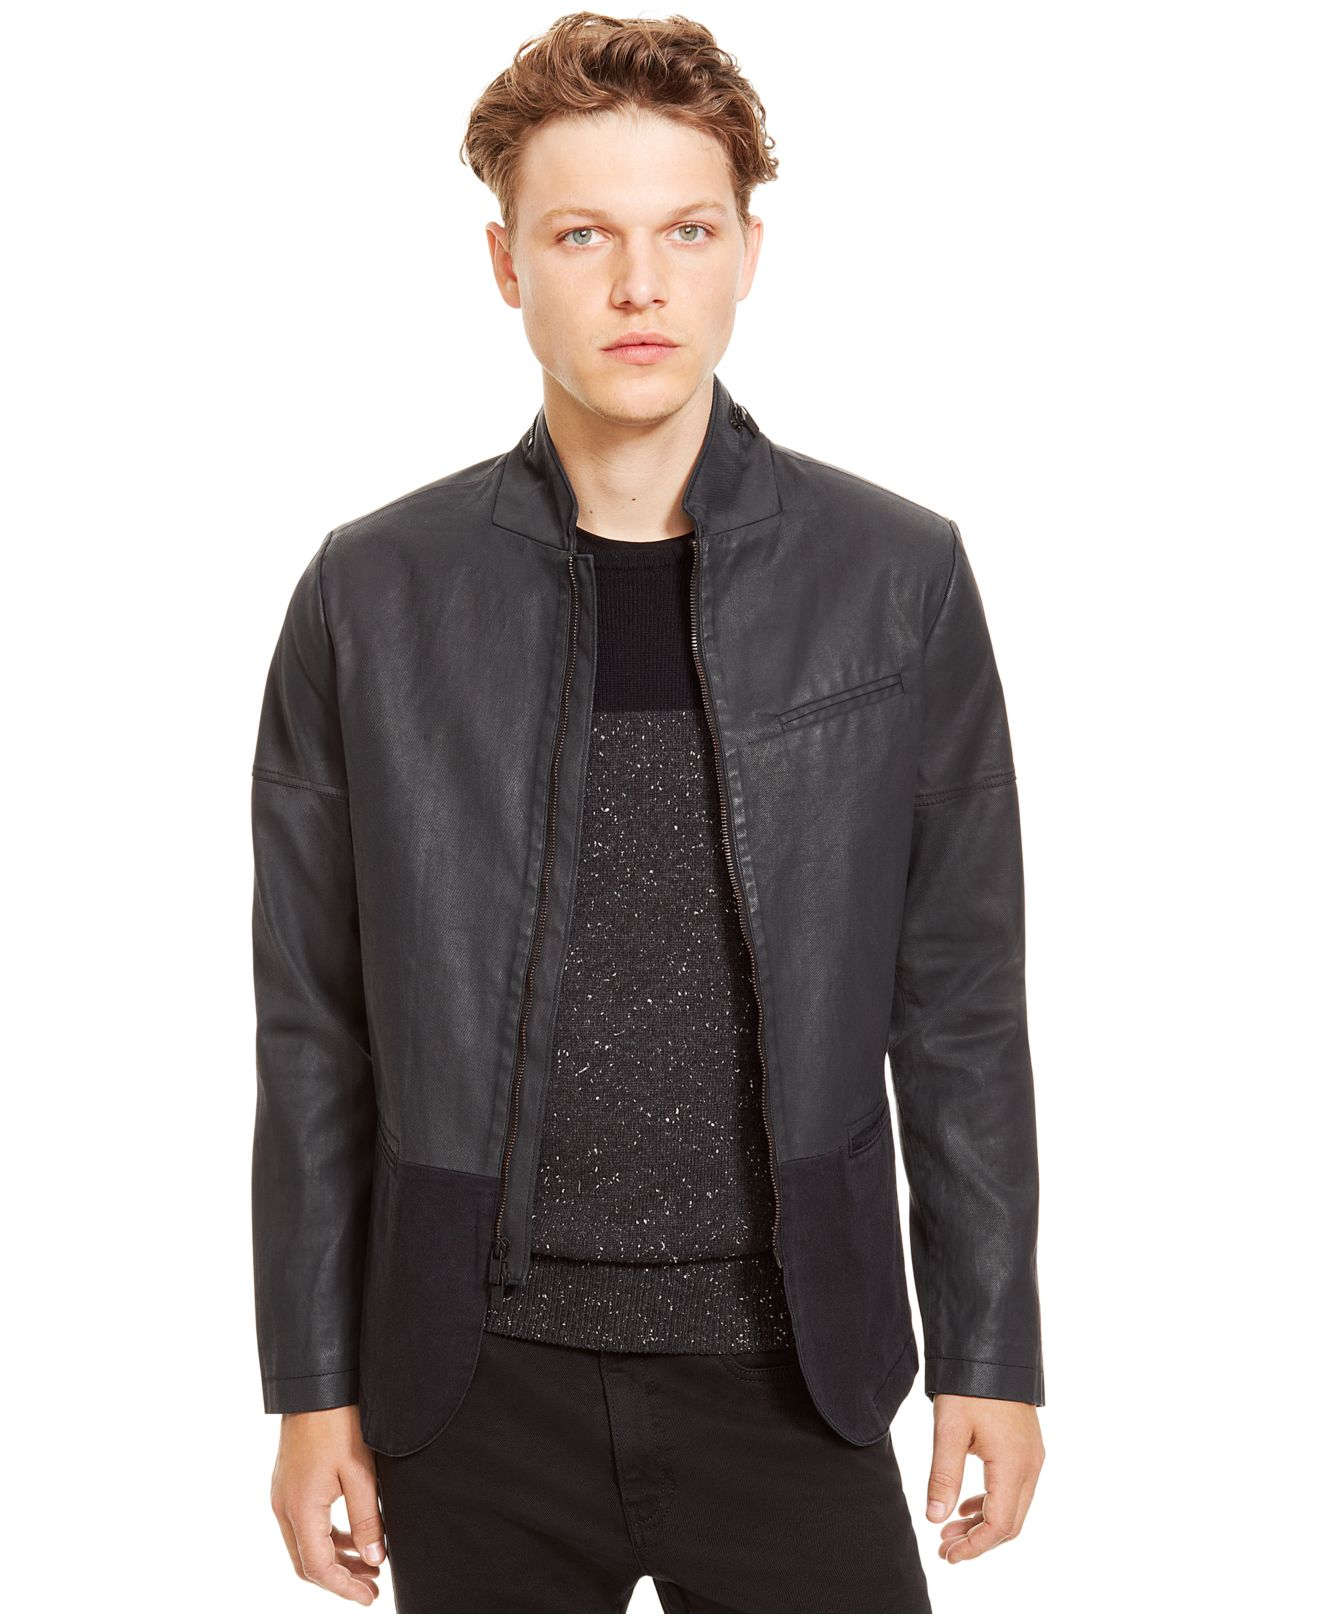 Lyst - Kenneth Cole Reaction Slim-fit Two-tone Jacket in Black for Men